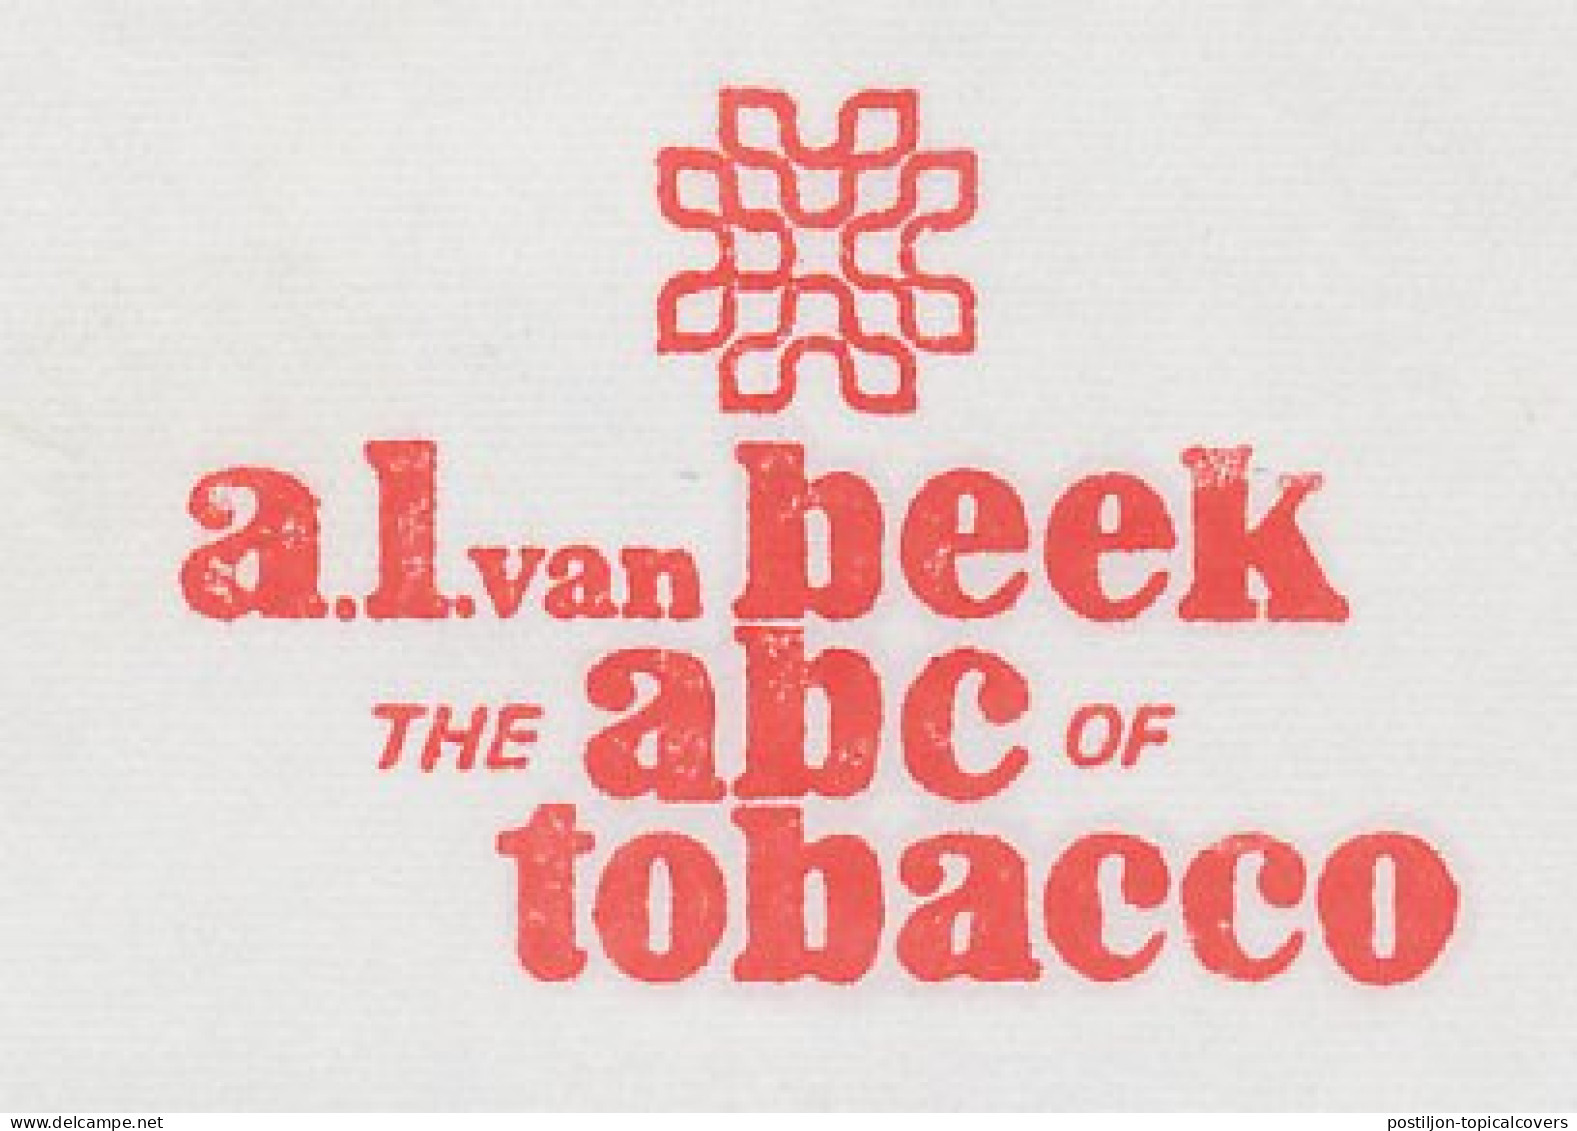 Meter Cut Netherlands 1986 The ABC Of Tobacco - Tabacco